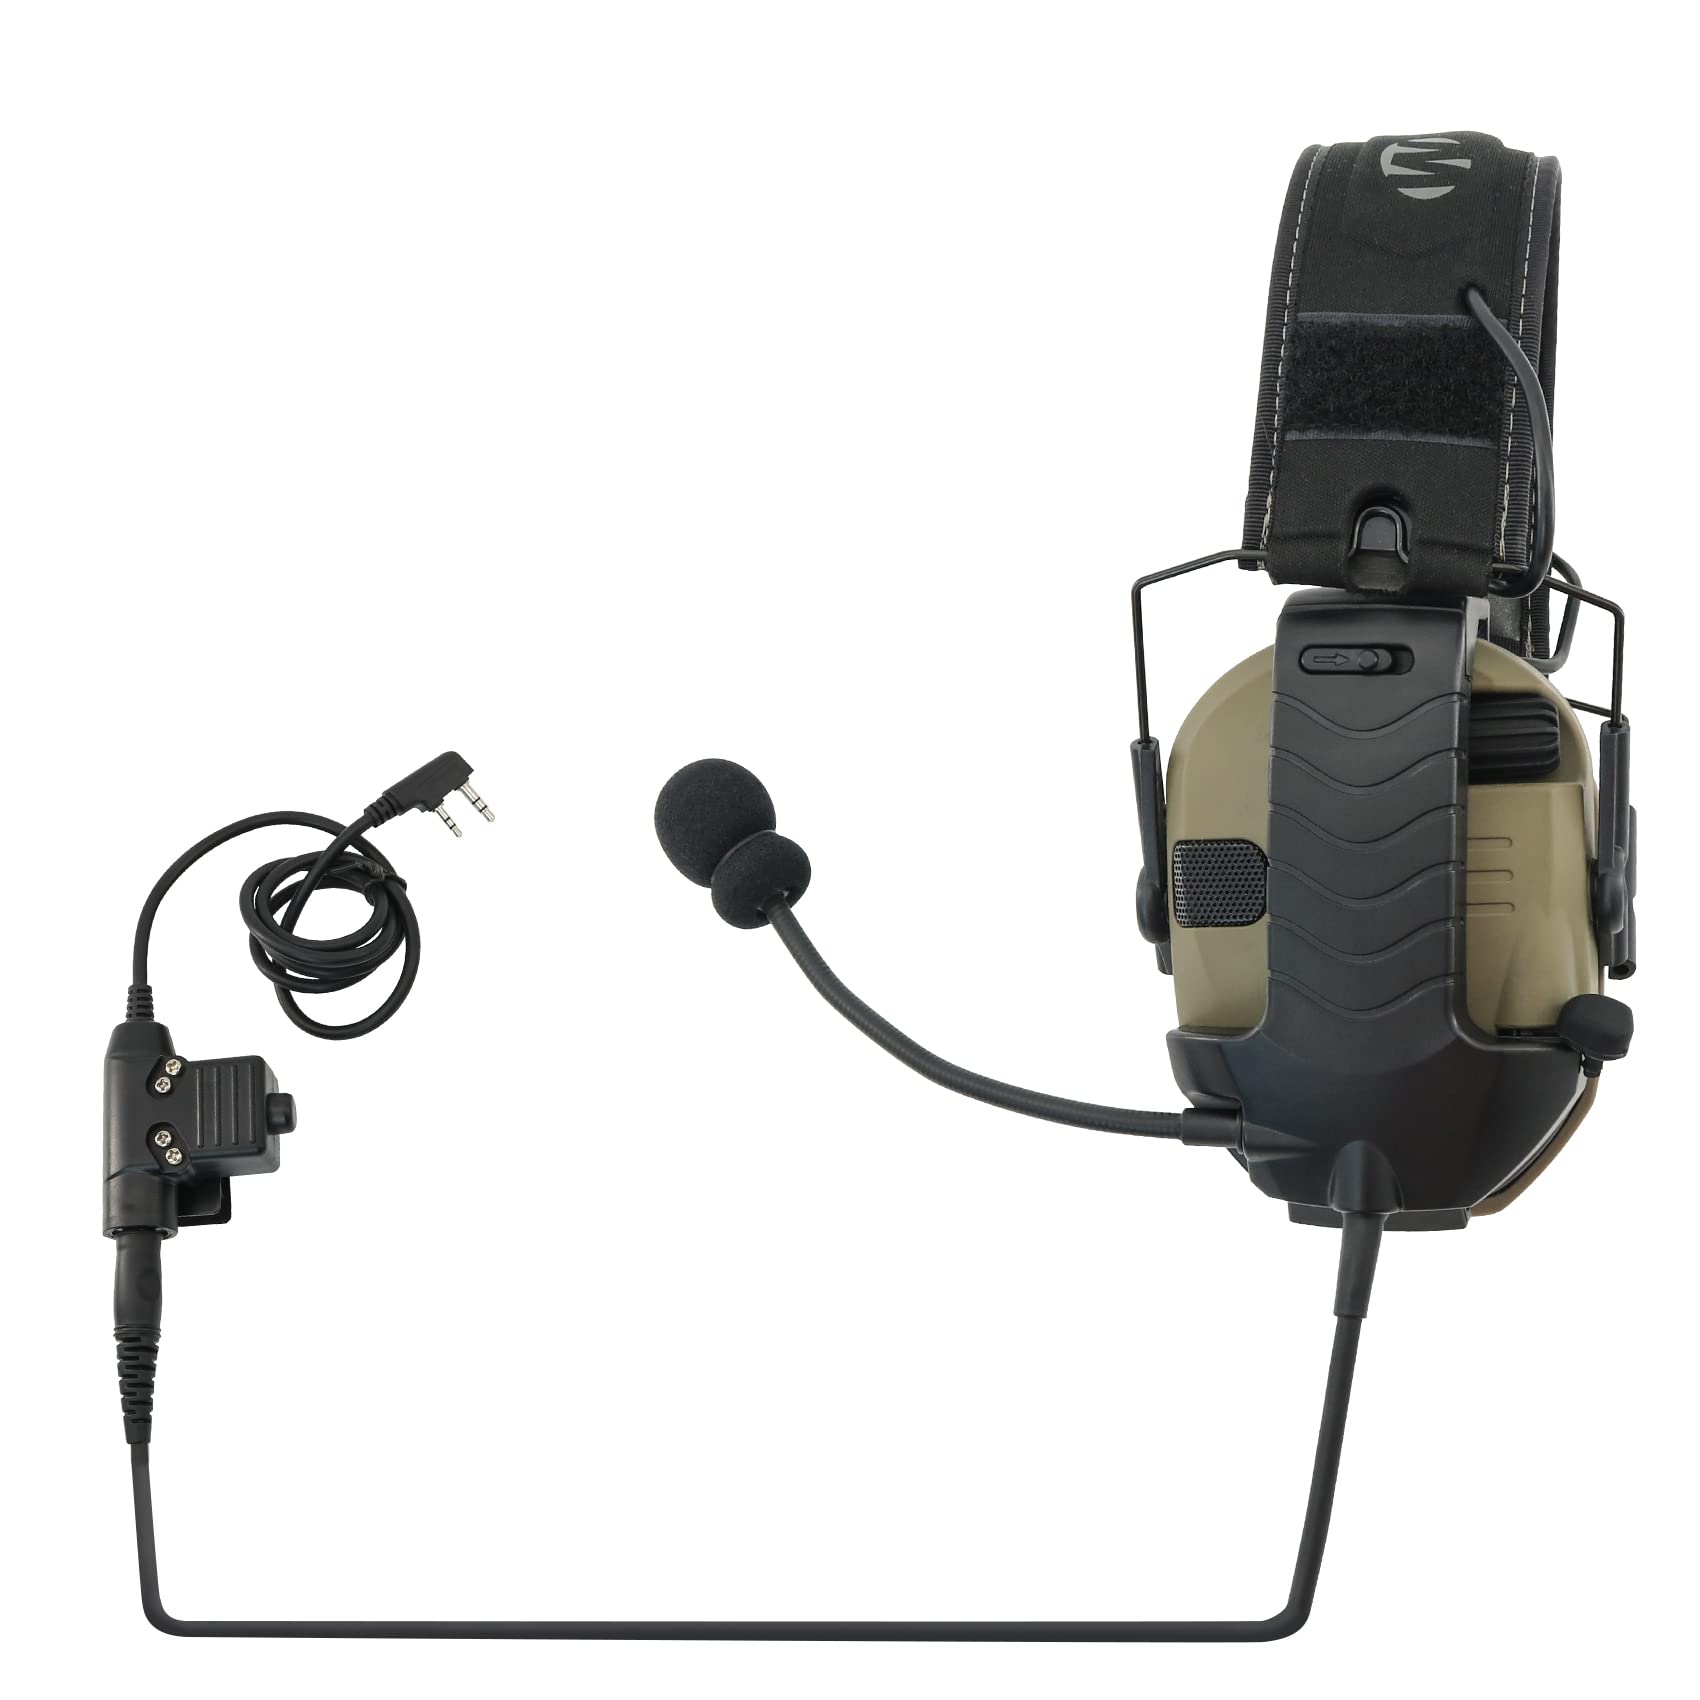 TSVISIONCORE Microphone & PTT for Walker's Razor Noise Cancelling Headphones Airsoft（Black）